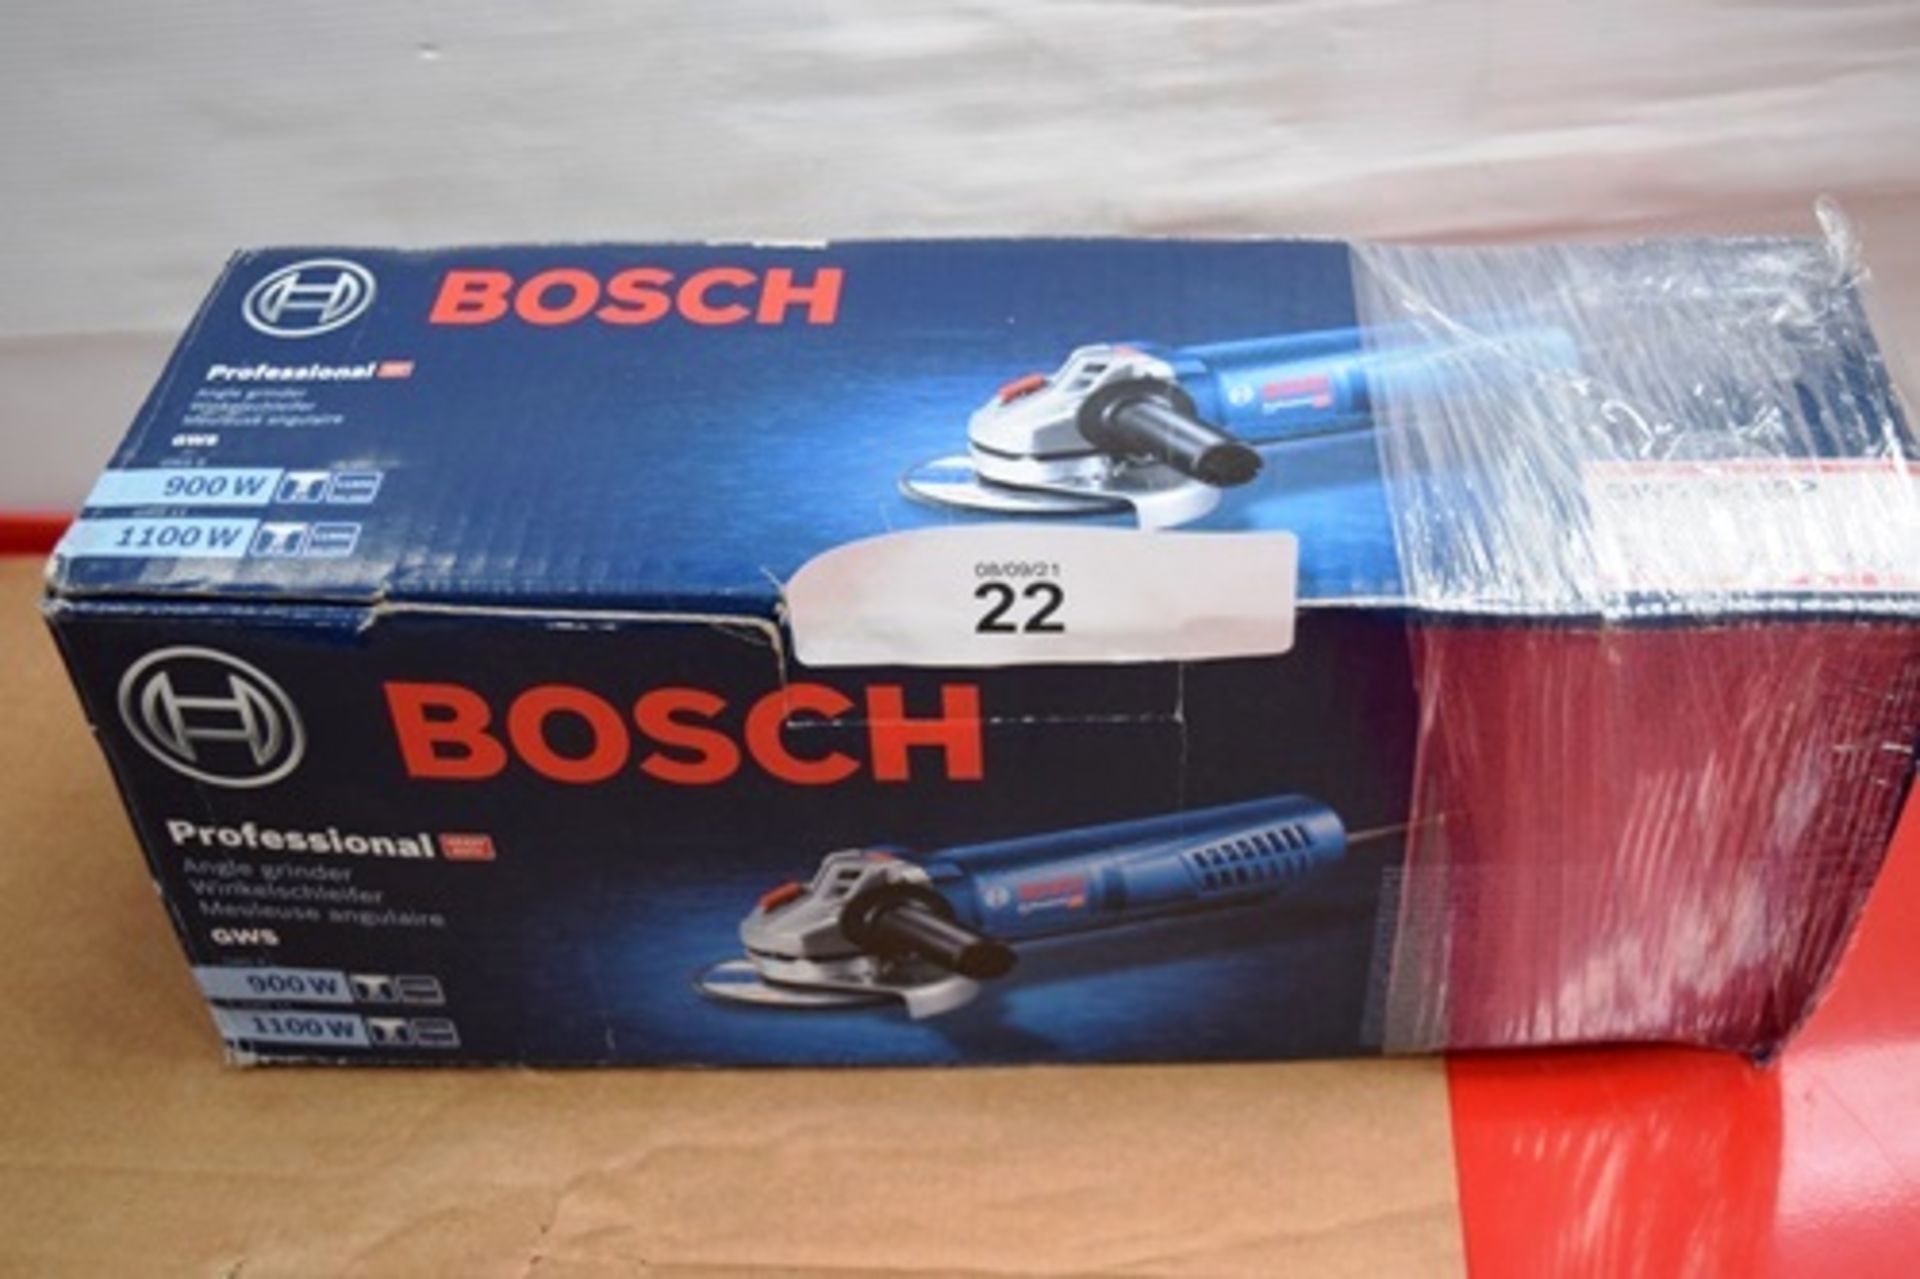 1 x Bosch 12V cordless impact drill/driver, model GSB 12V-15, body only, 1 x Bosch angle grinder, - Image 4 of 4